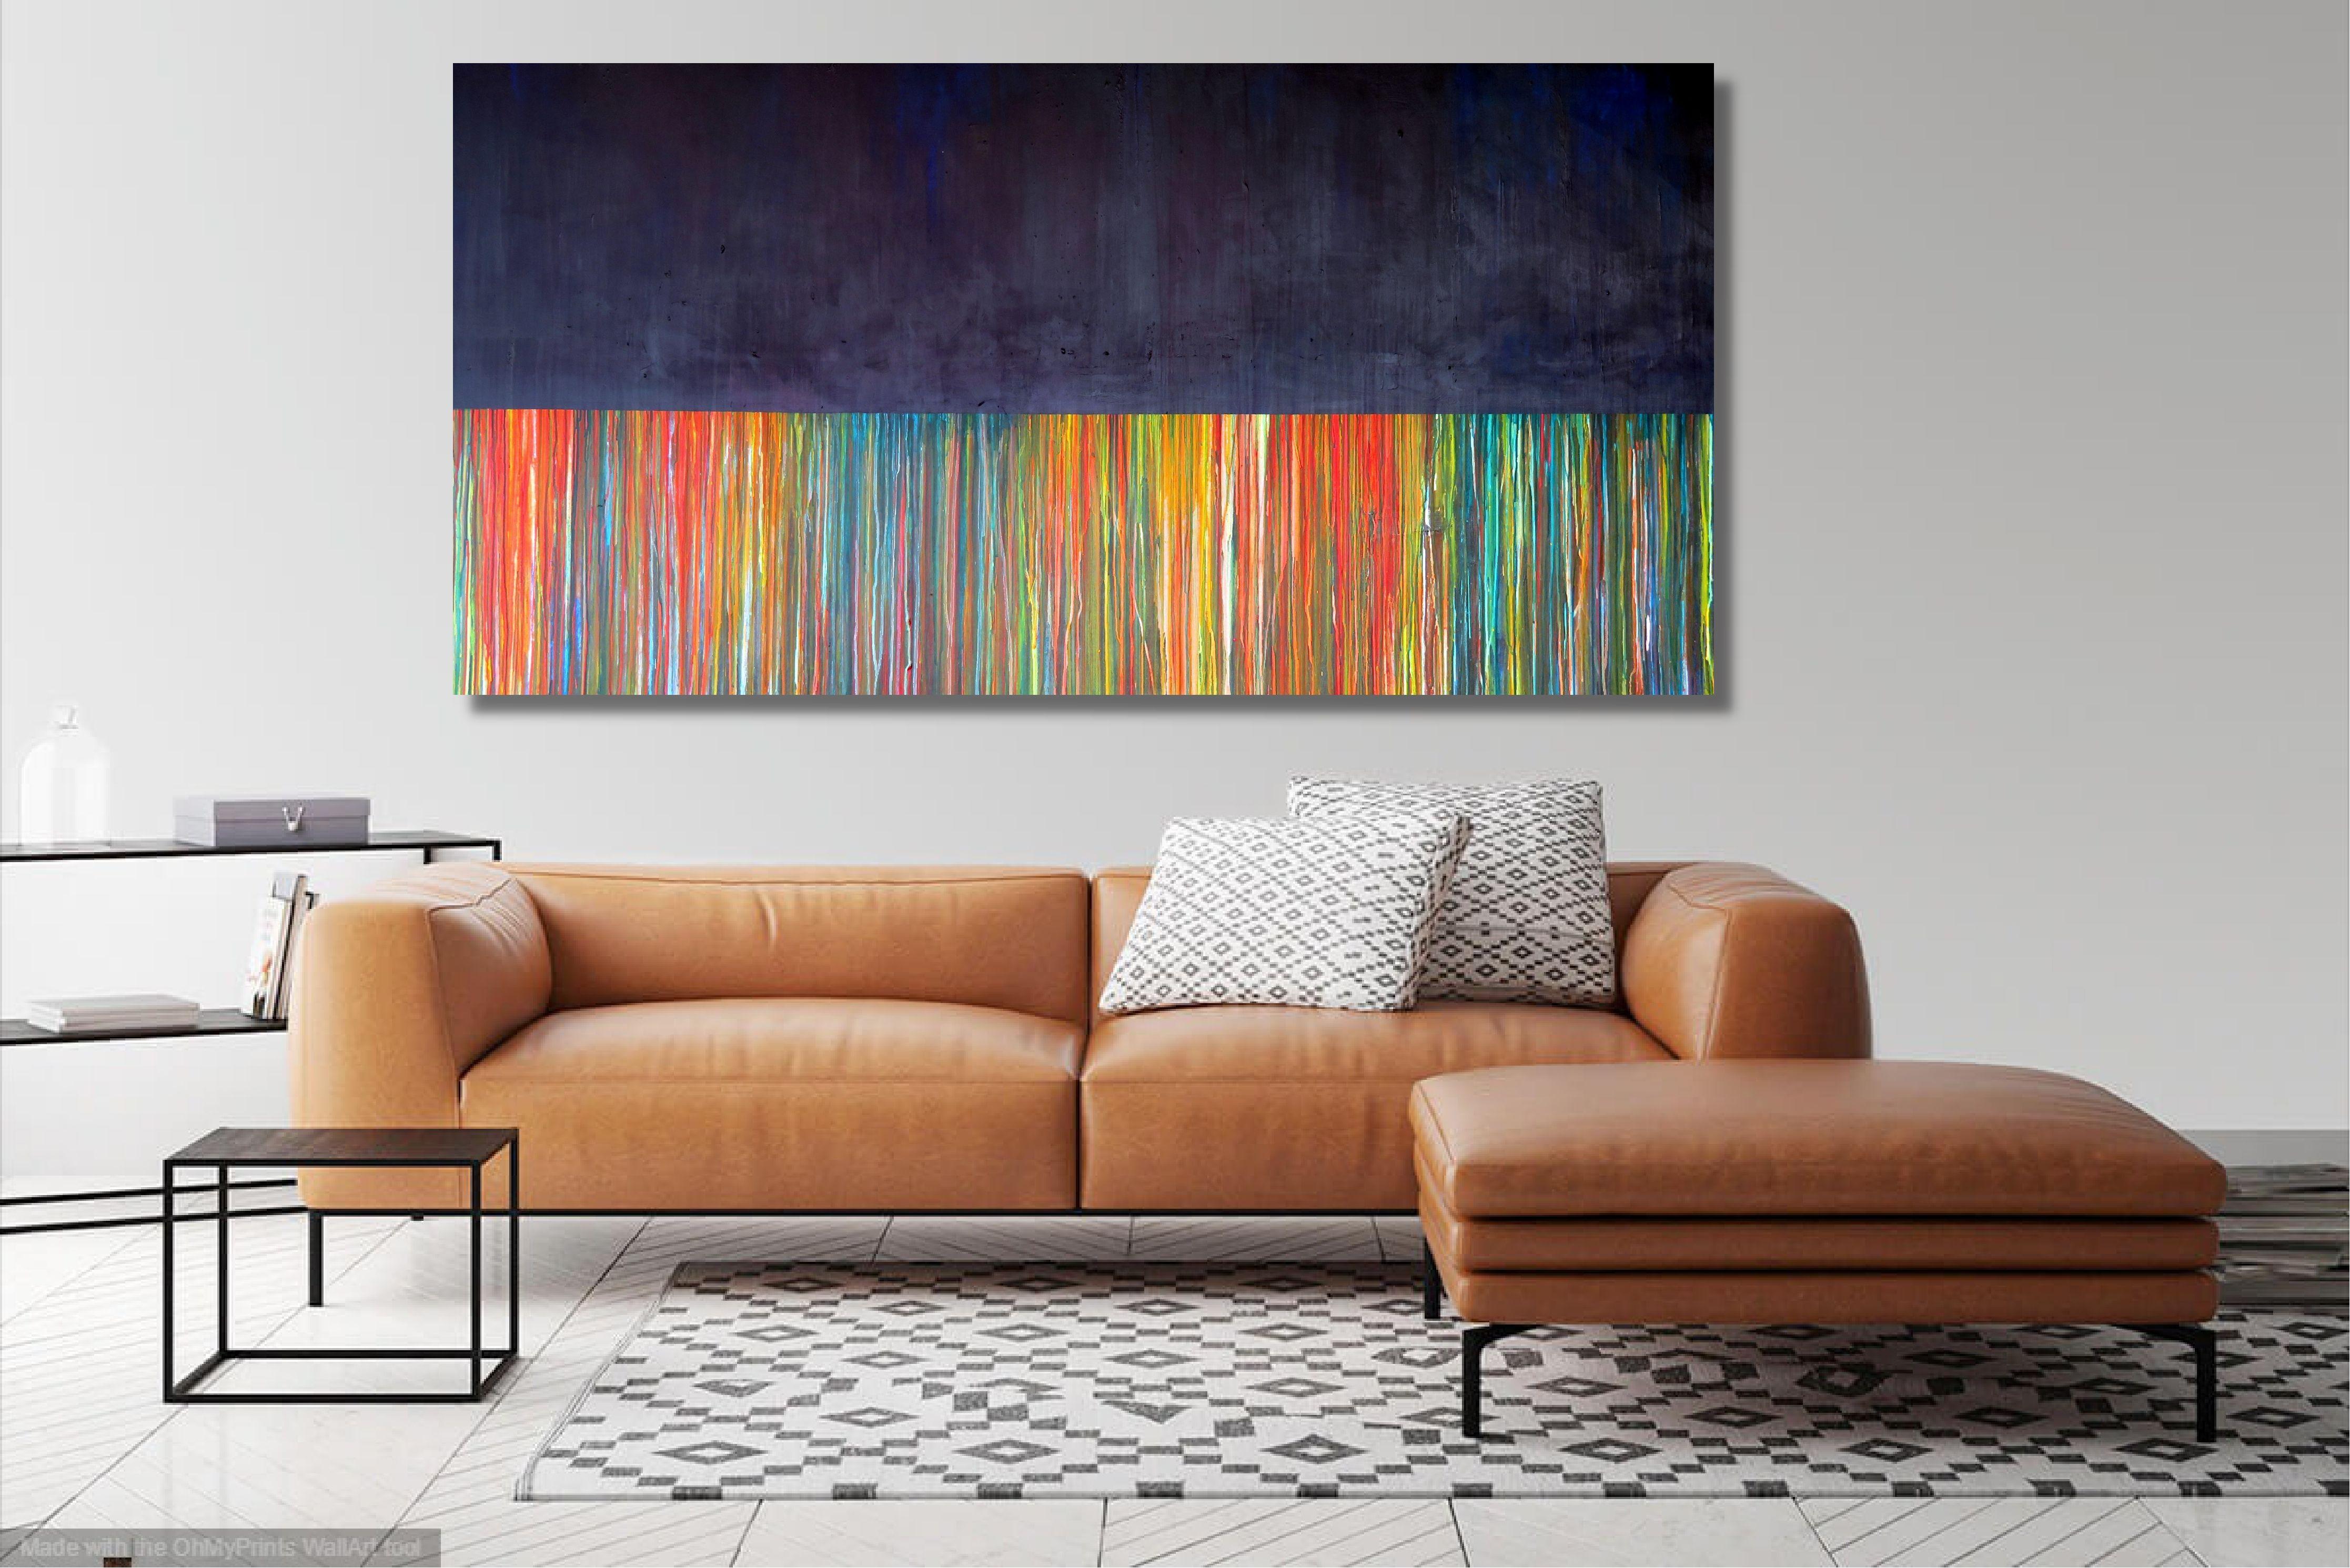 The Emotional Creation #257, Painting, Acrylic on Canvas - Black Abstract Painting by Carla Sá Fernandes